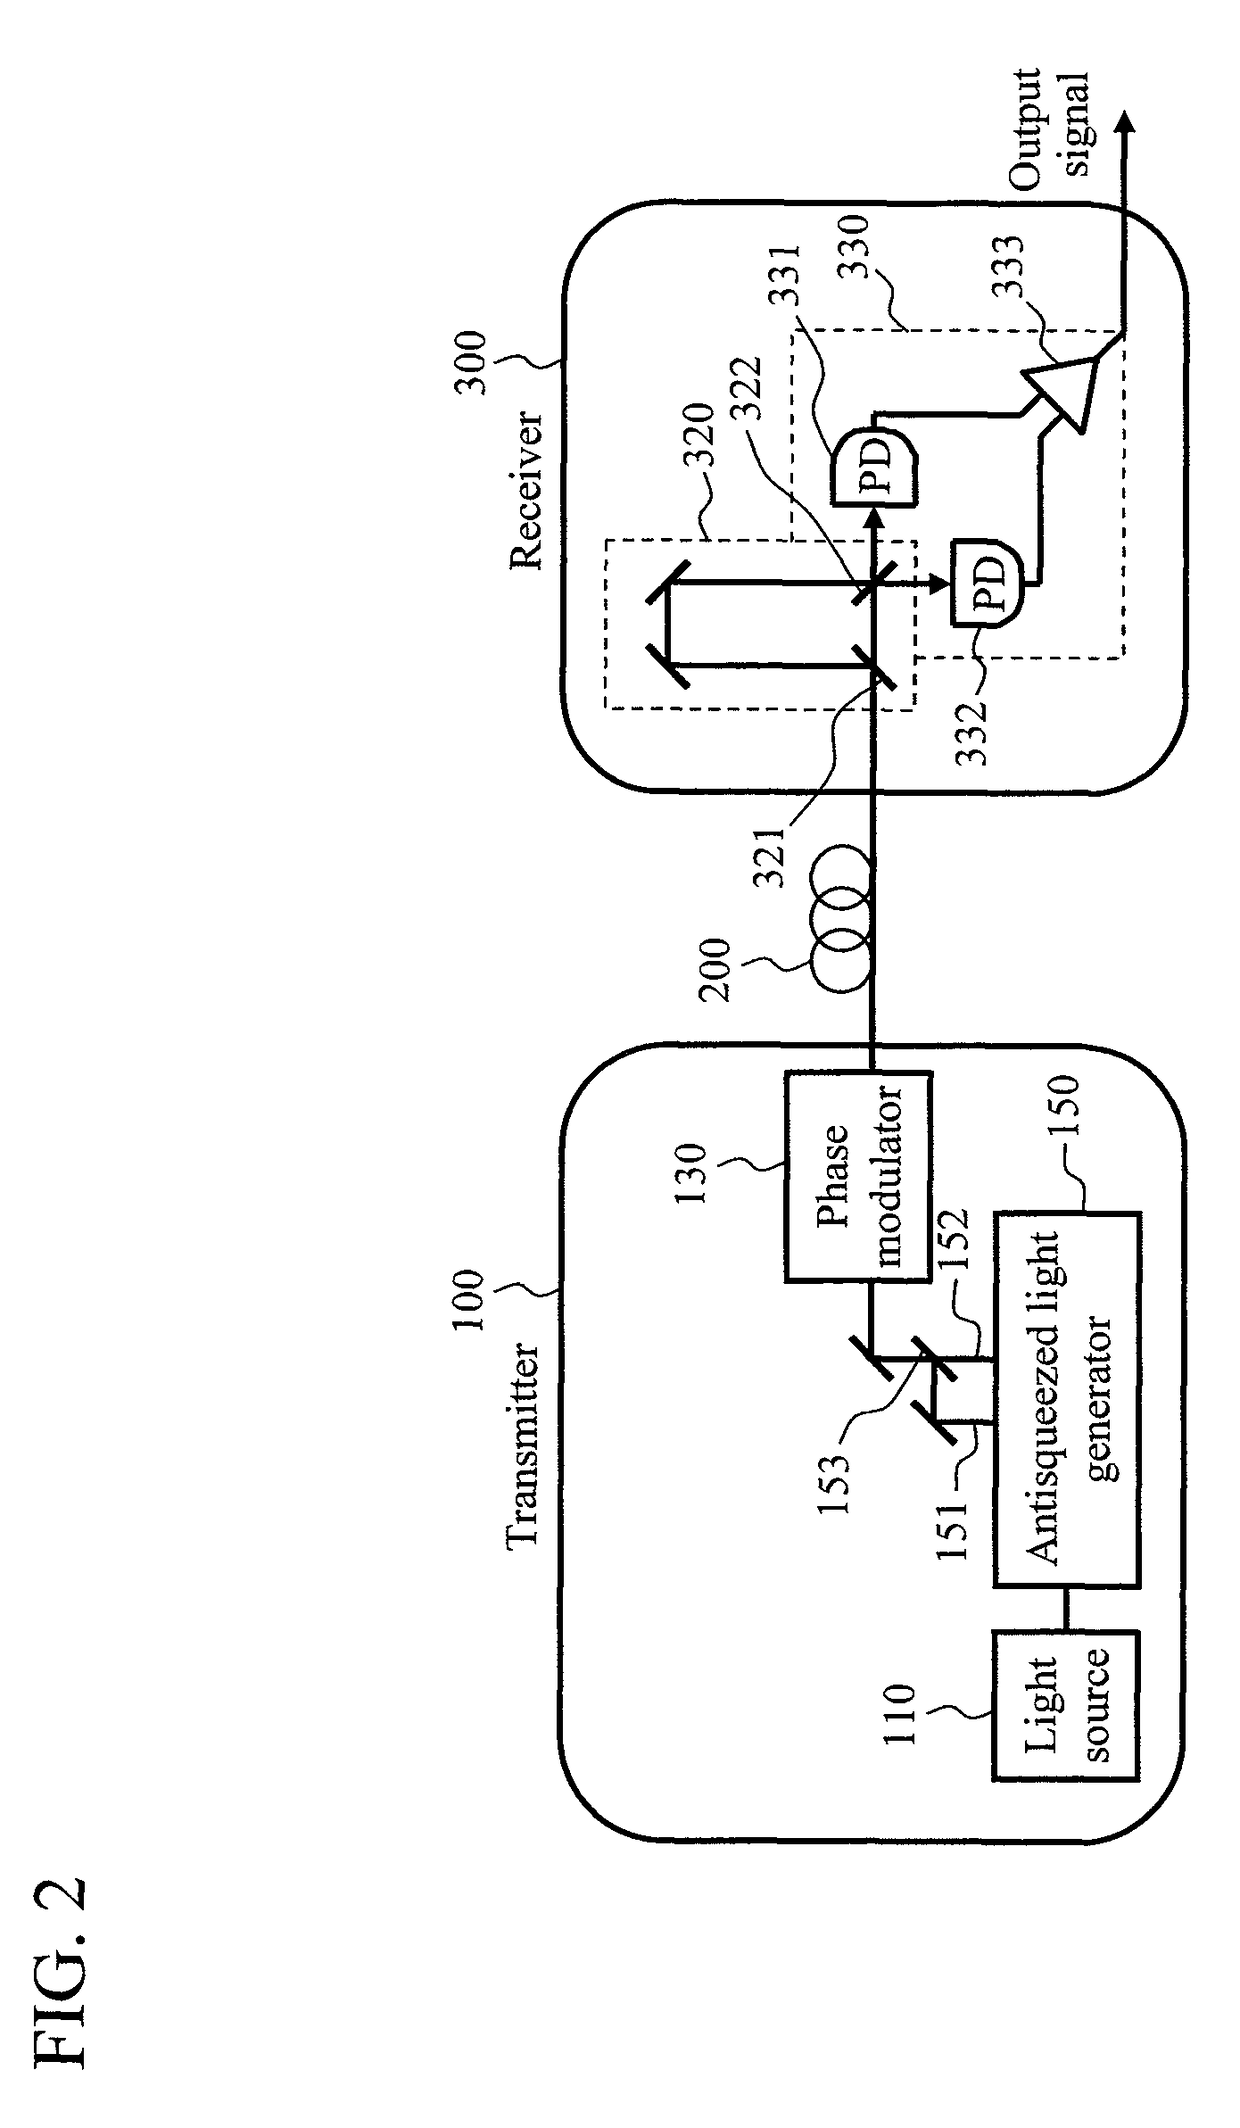 Optical transmitting and receiving system